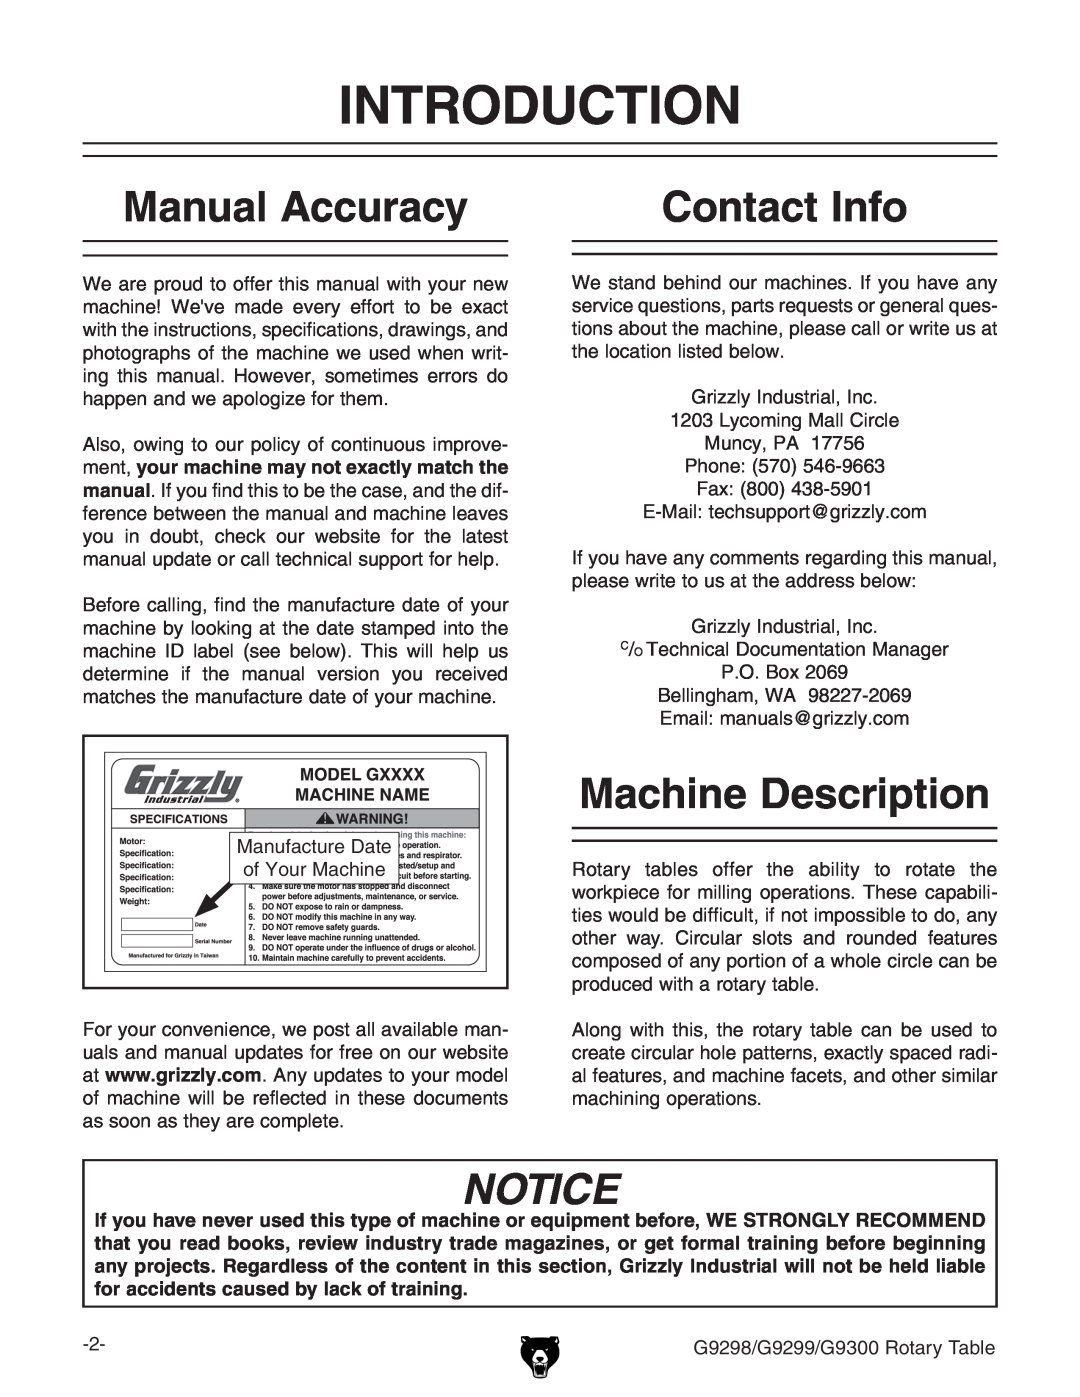 Grizzly G9298 owner manual Introduction, Manual Accuracy, Contact Info, Machine Description 